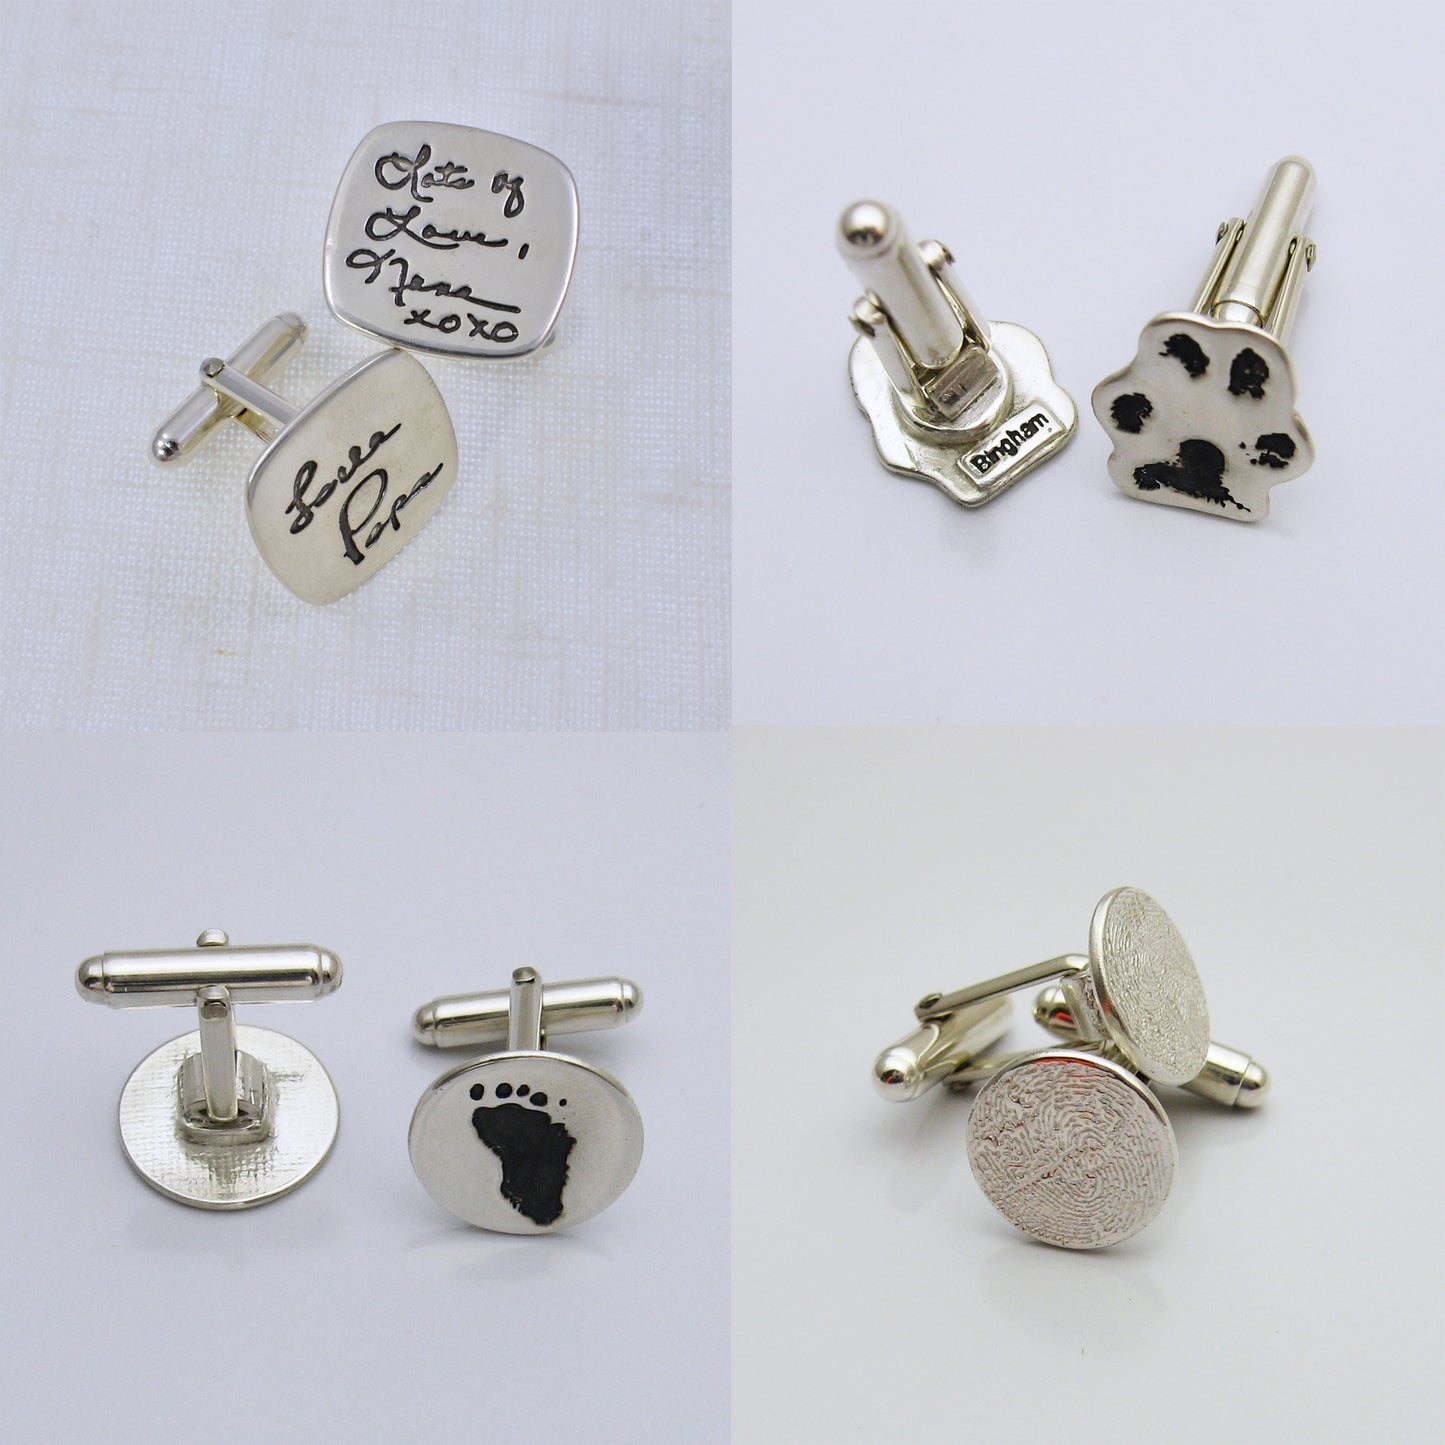 Photo Collage of Various Cufflinks Designs